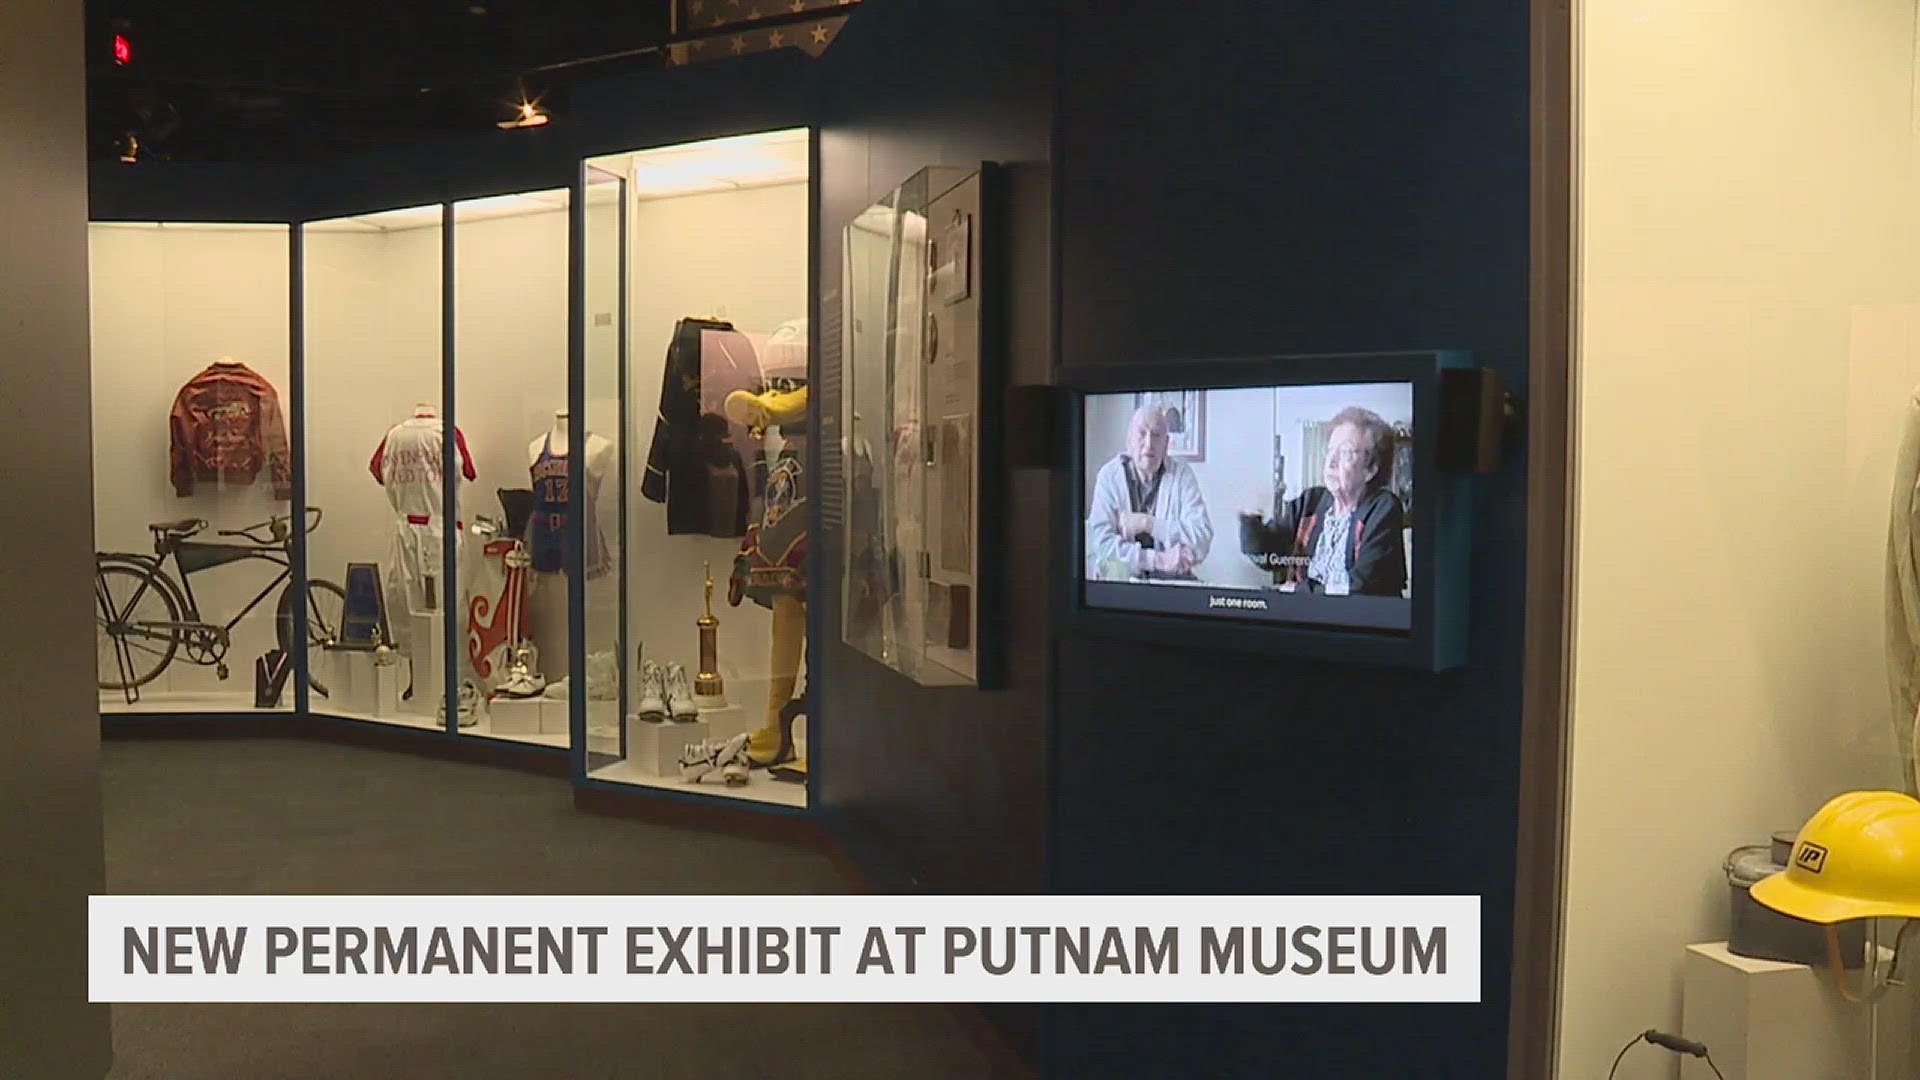 The interactive exhibit will showcase never before seen artifacts from the Putnam's 250,000-piece collection.